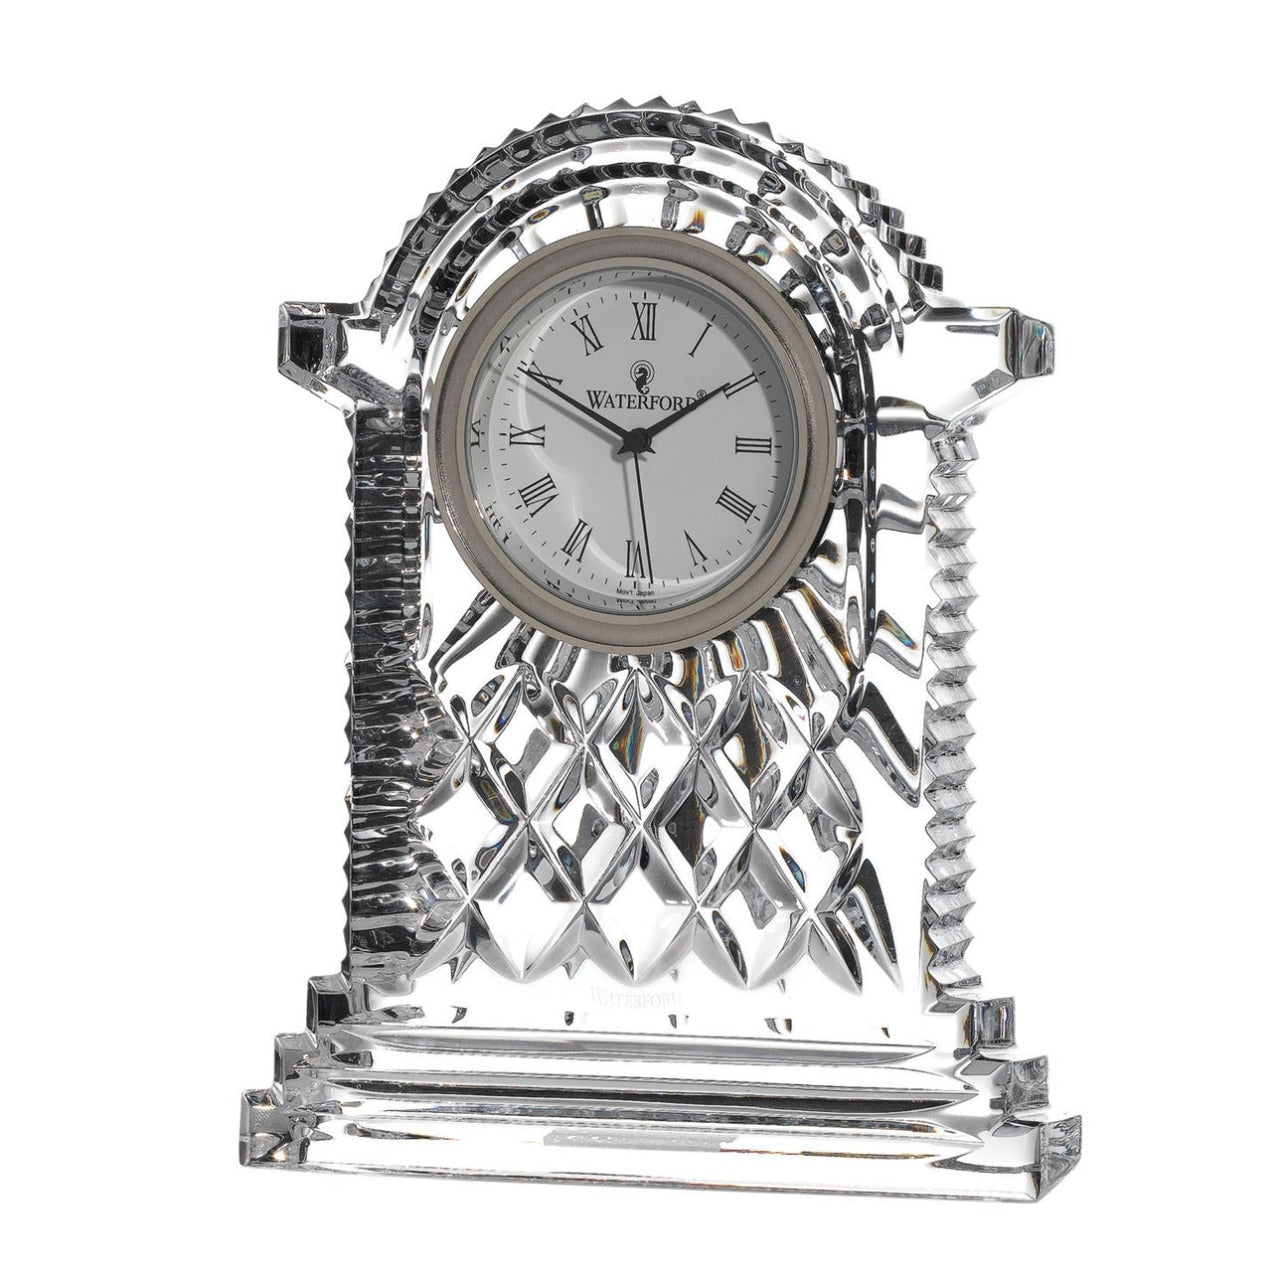 Waterford Crystal Lismore 17.5cm Carriage Clock  Waterford Lismore 17.5cm Clock - The Waterford Lismore pattern is a stunning combination of brilliance and clarity. Now your clock can be as sharp as your timekeeping.